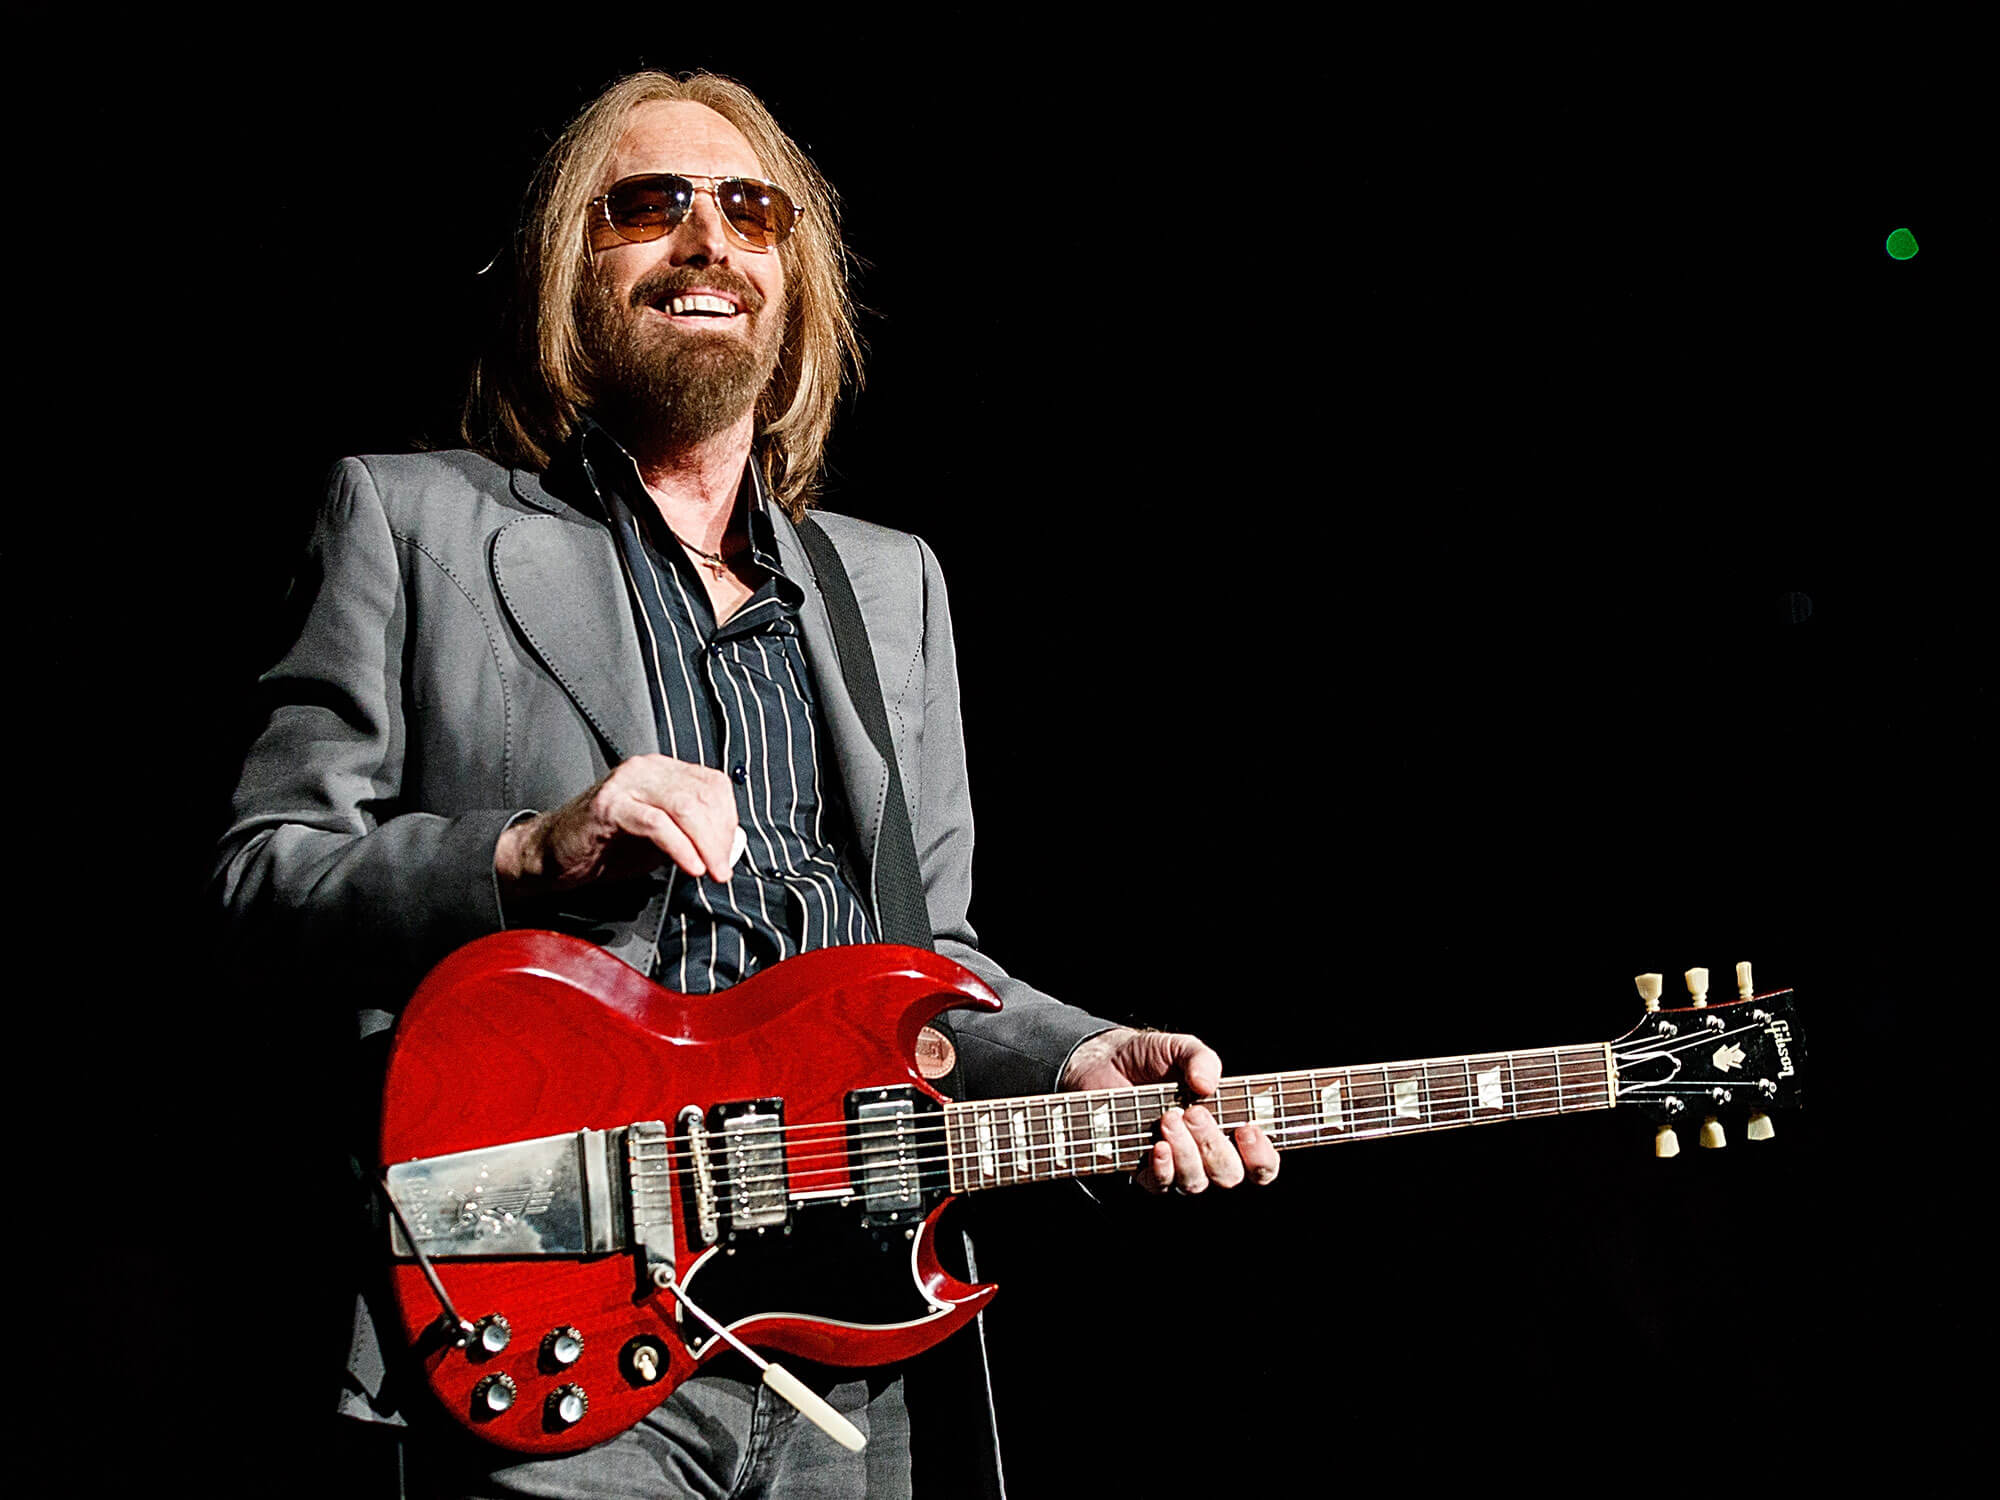 Tom Petty performing live